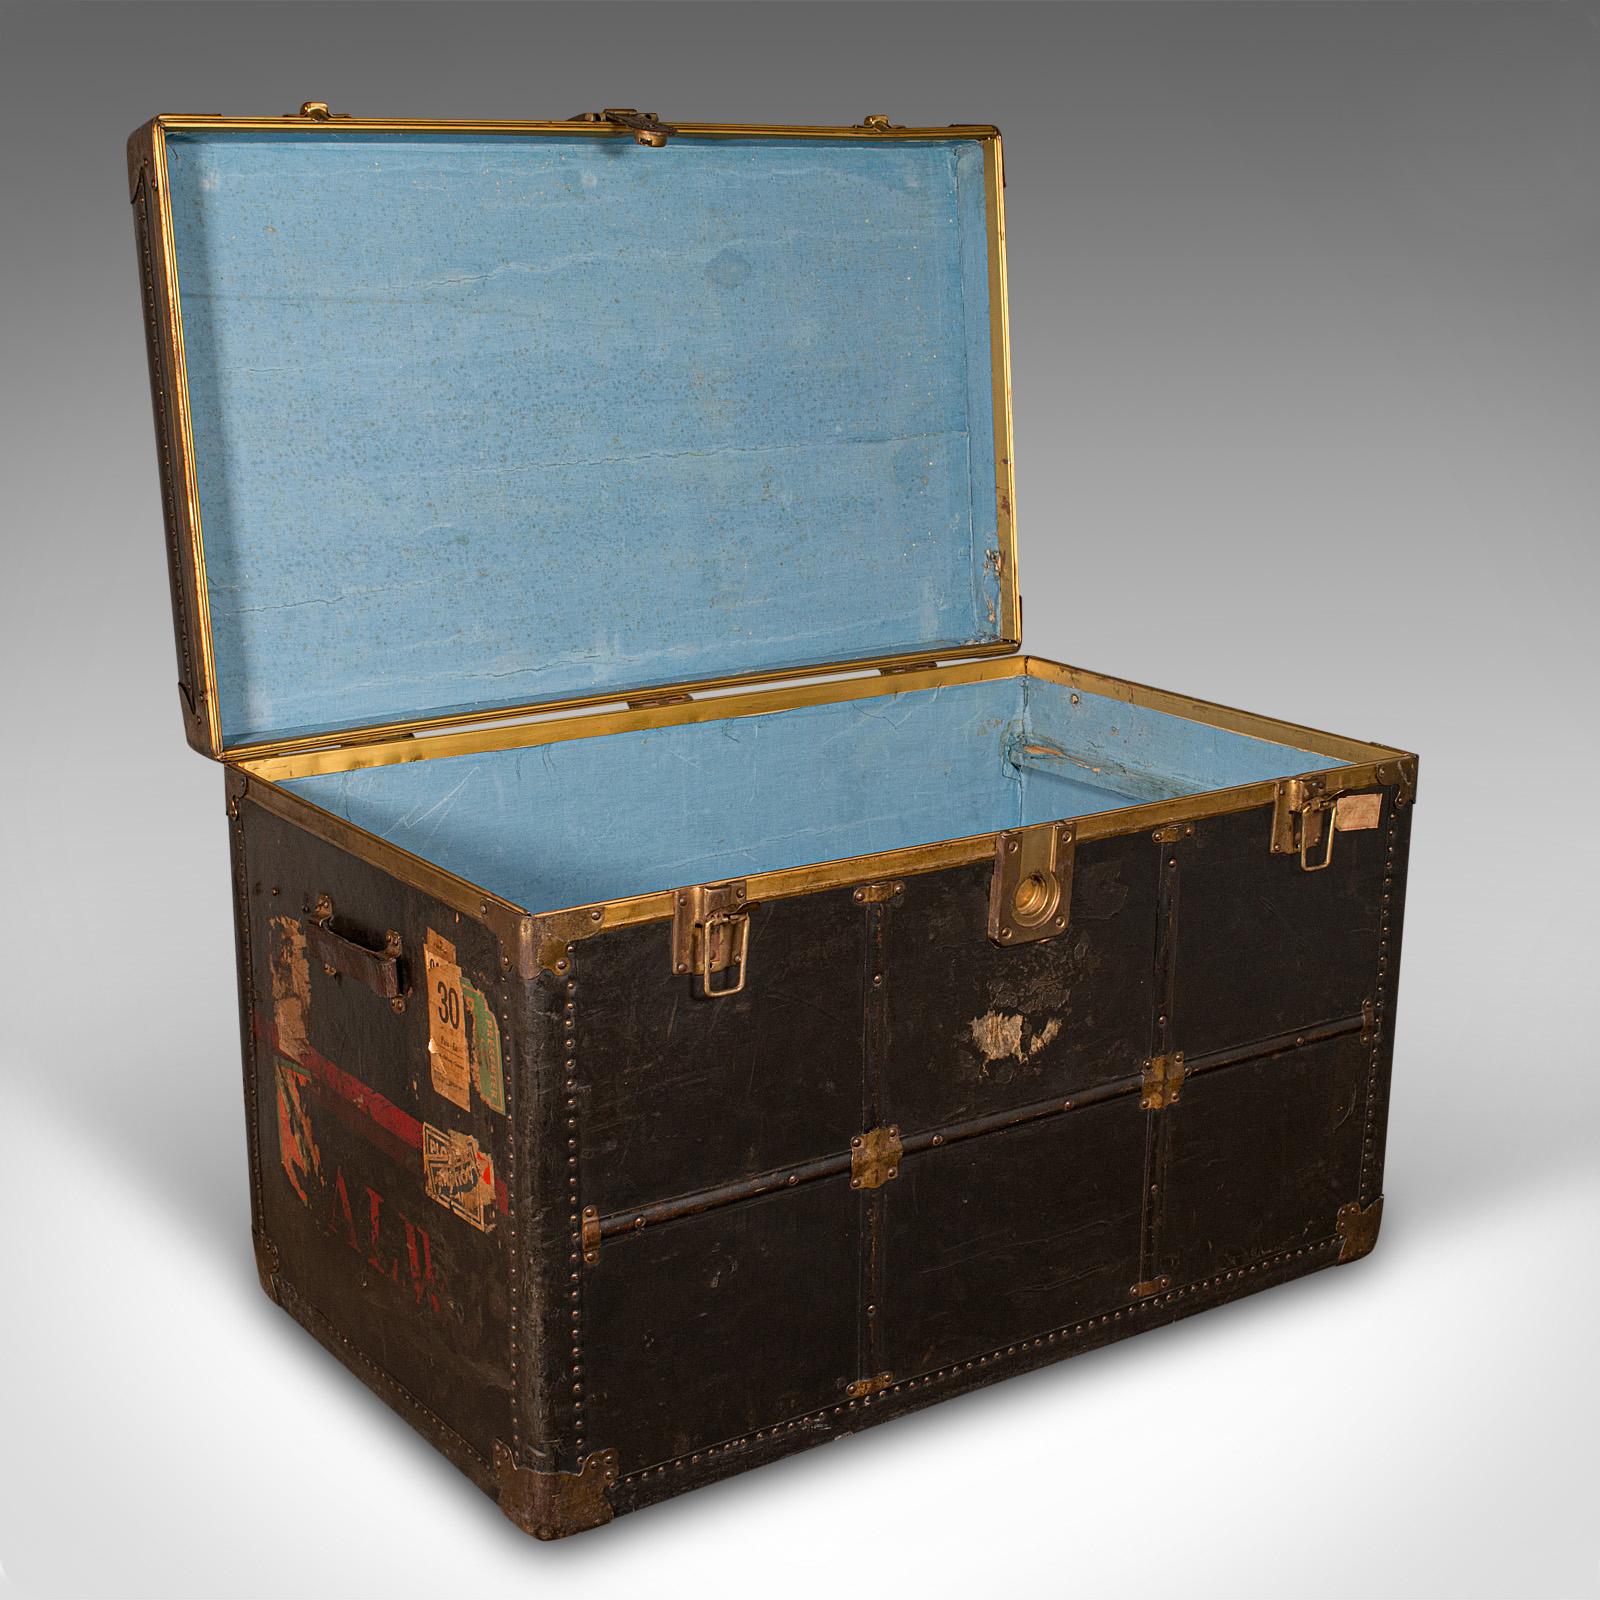 This is a large antique steamer trunk. An American, leather and brass bound shipping chest, dating to the Edwardian period, circa 1910.

Fine example of decorative furniture, with a generously sized interior
Displays a desirable aged patina and in